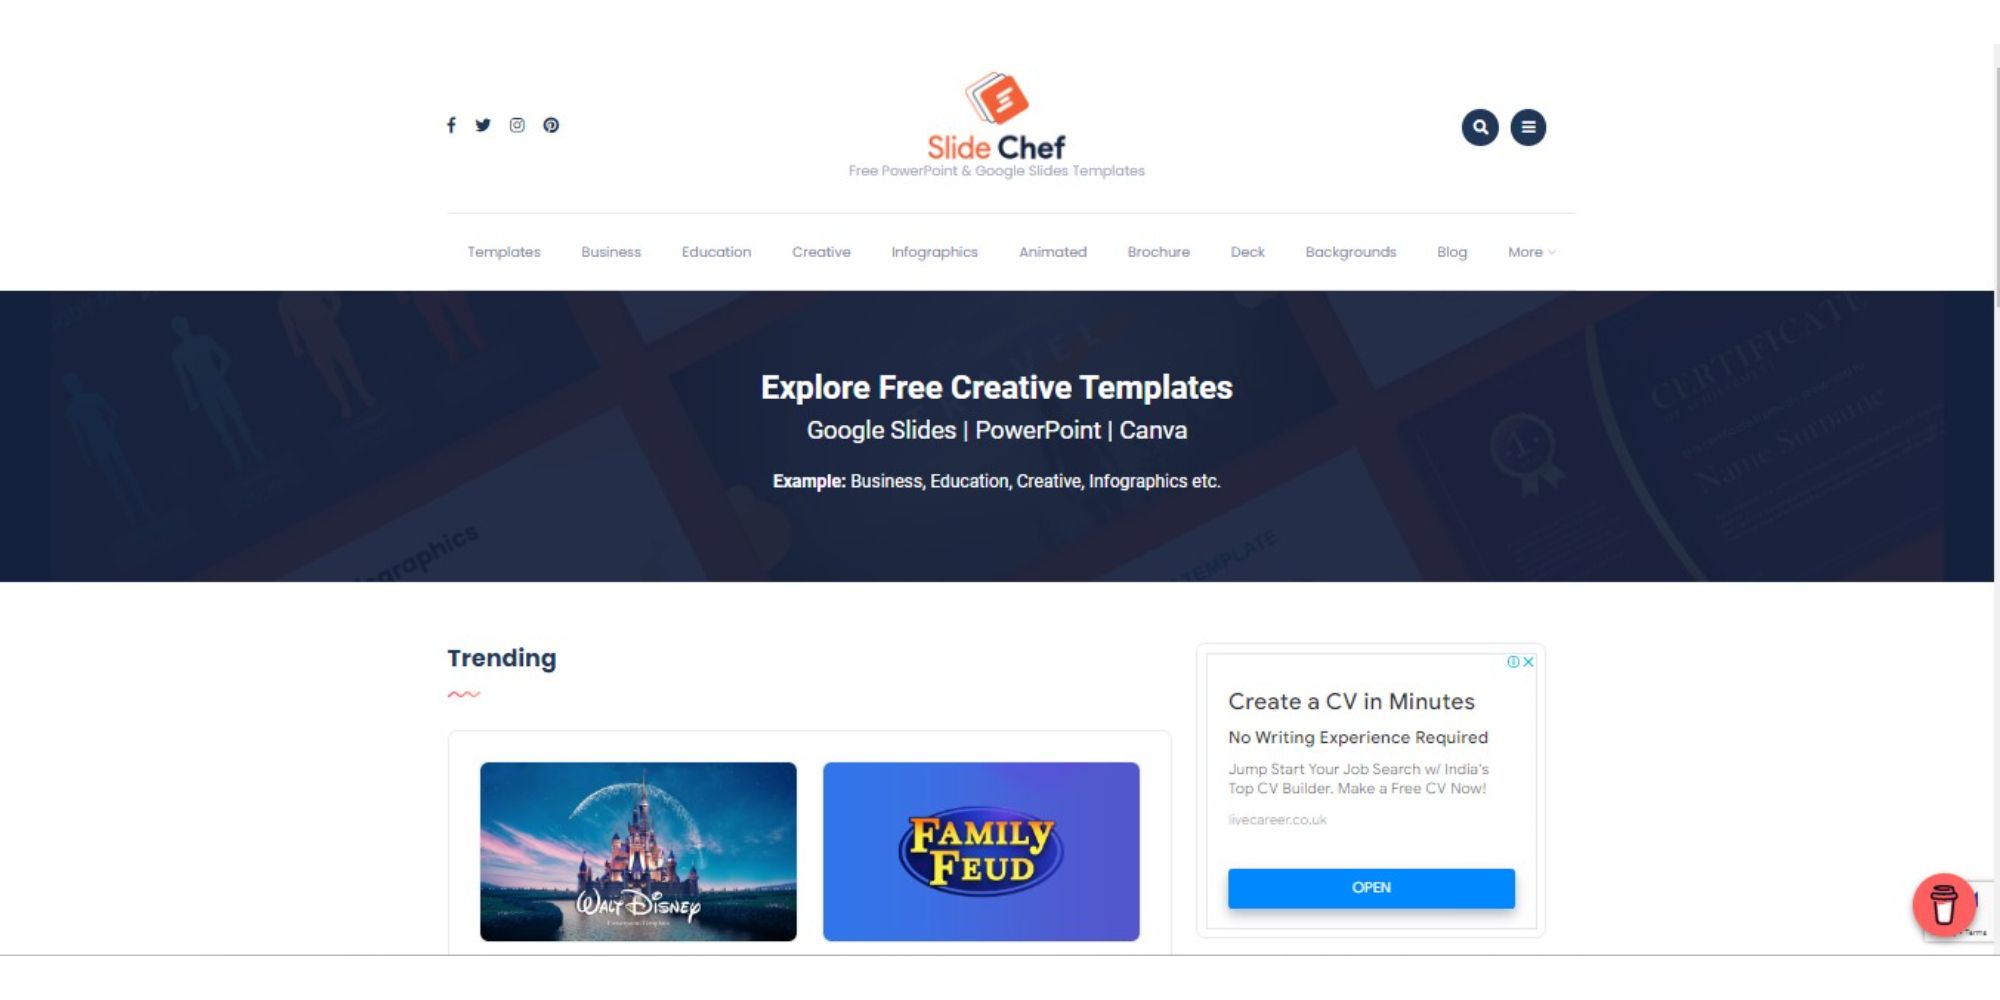 Animated powerpoint templates in Slide Chef